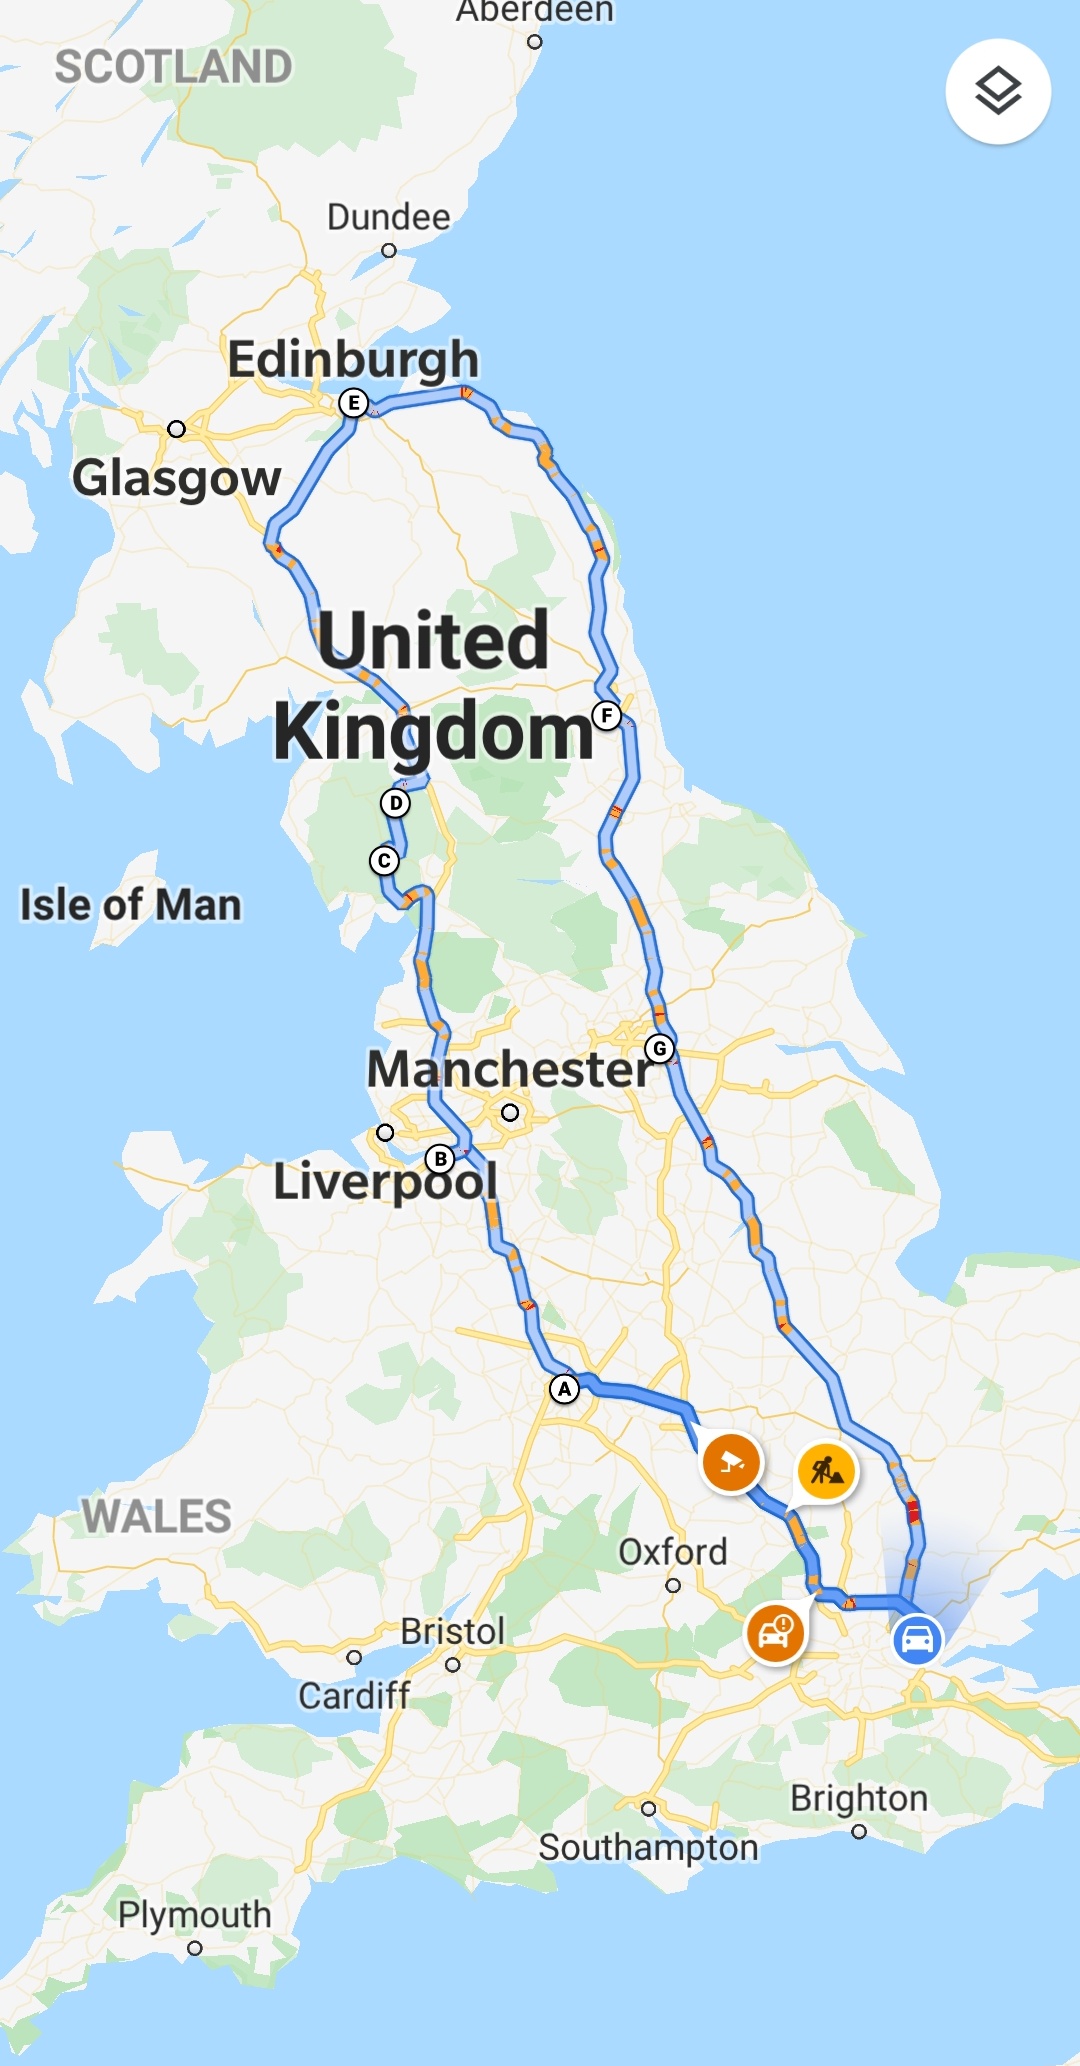 places to visit on route to edinburgh